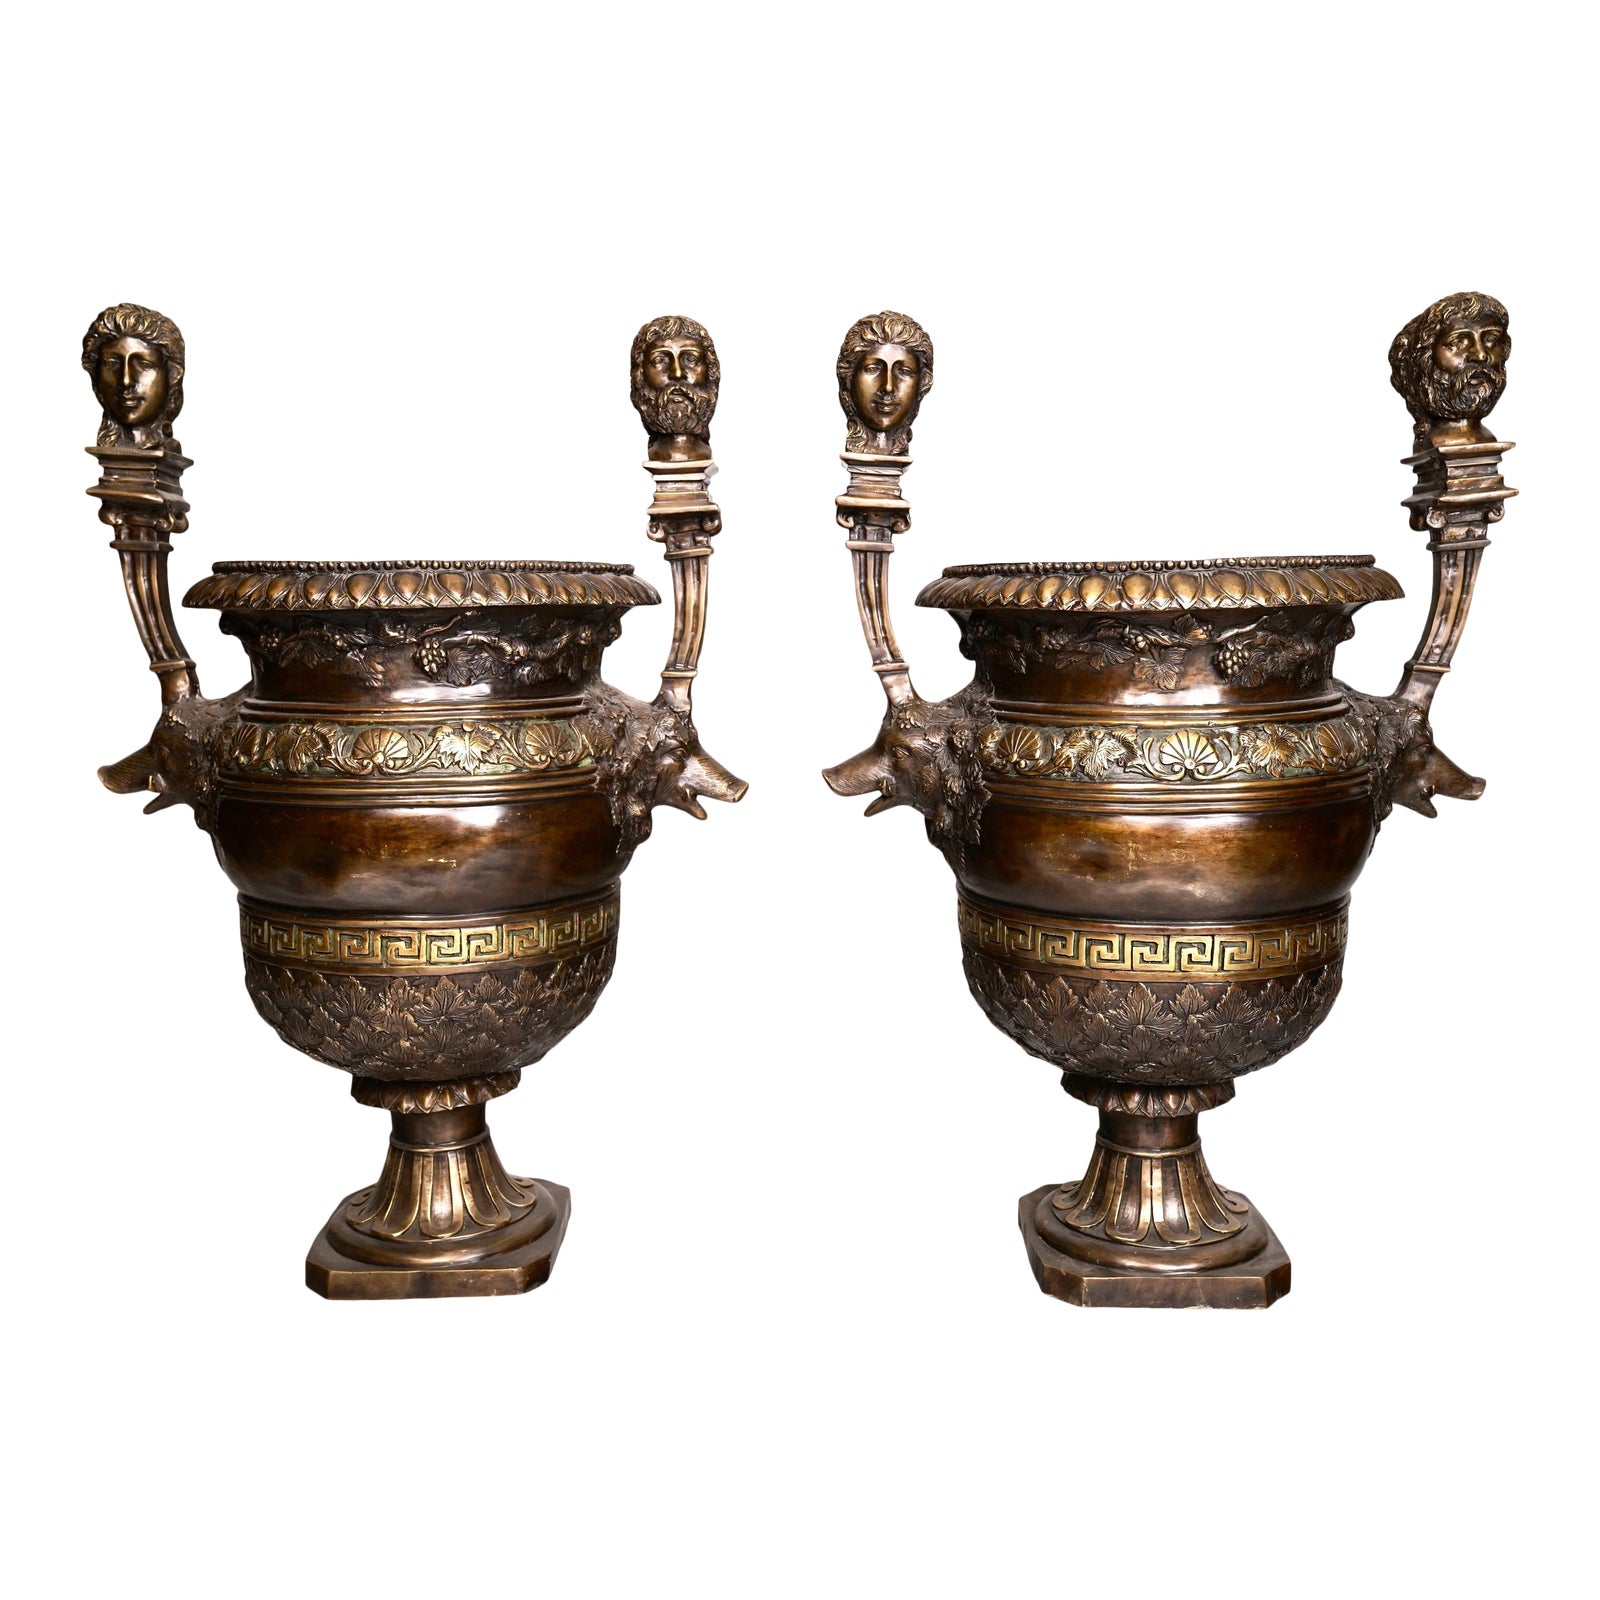 Ib hylde lærling A Pair Of Circa 1850 Neoclassical Patinated Bronze Urns - Antiques  Resources, Chicago